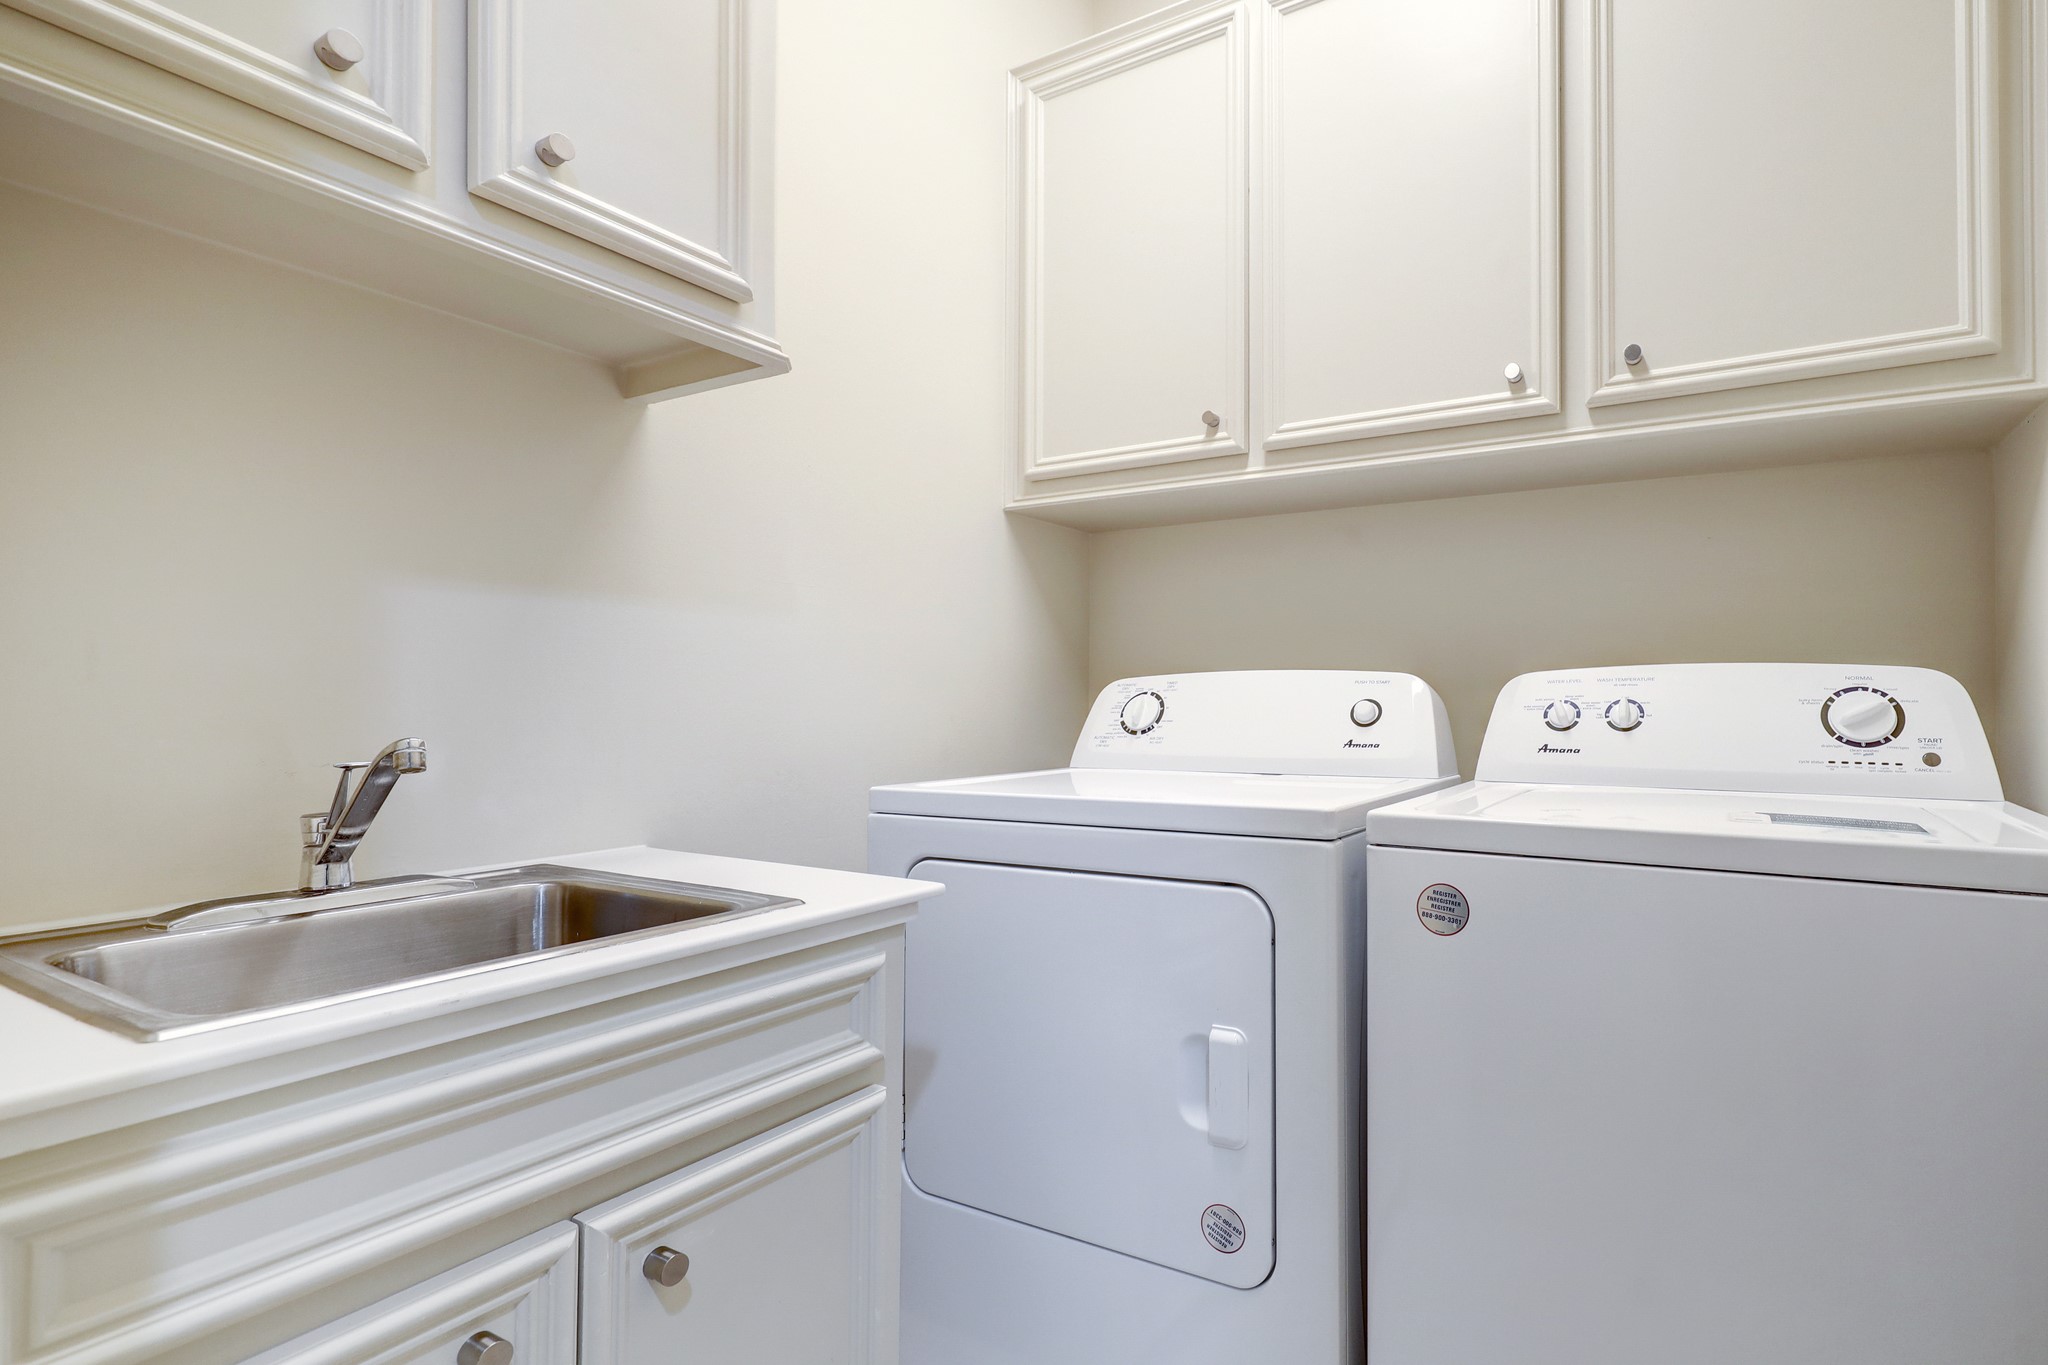 The nice sized laundry rooms offers ample storage ad a large stainless soaking sink.